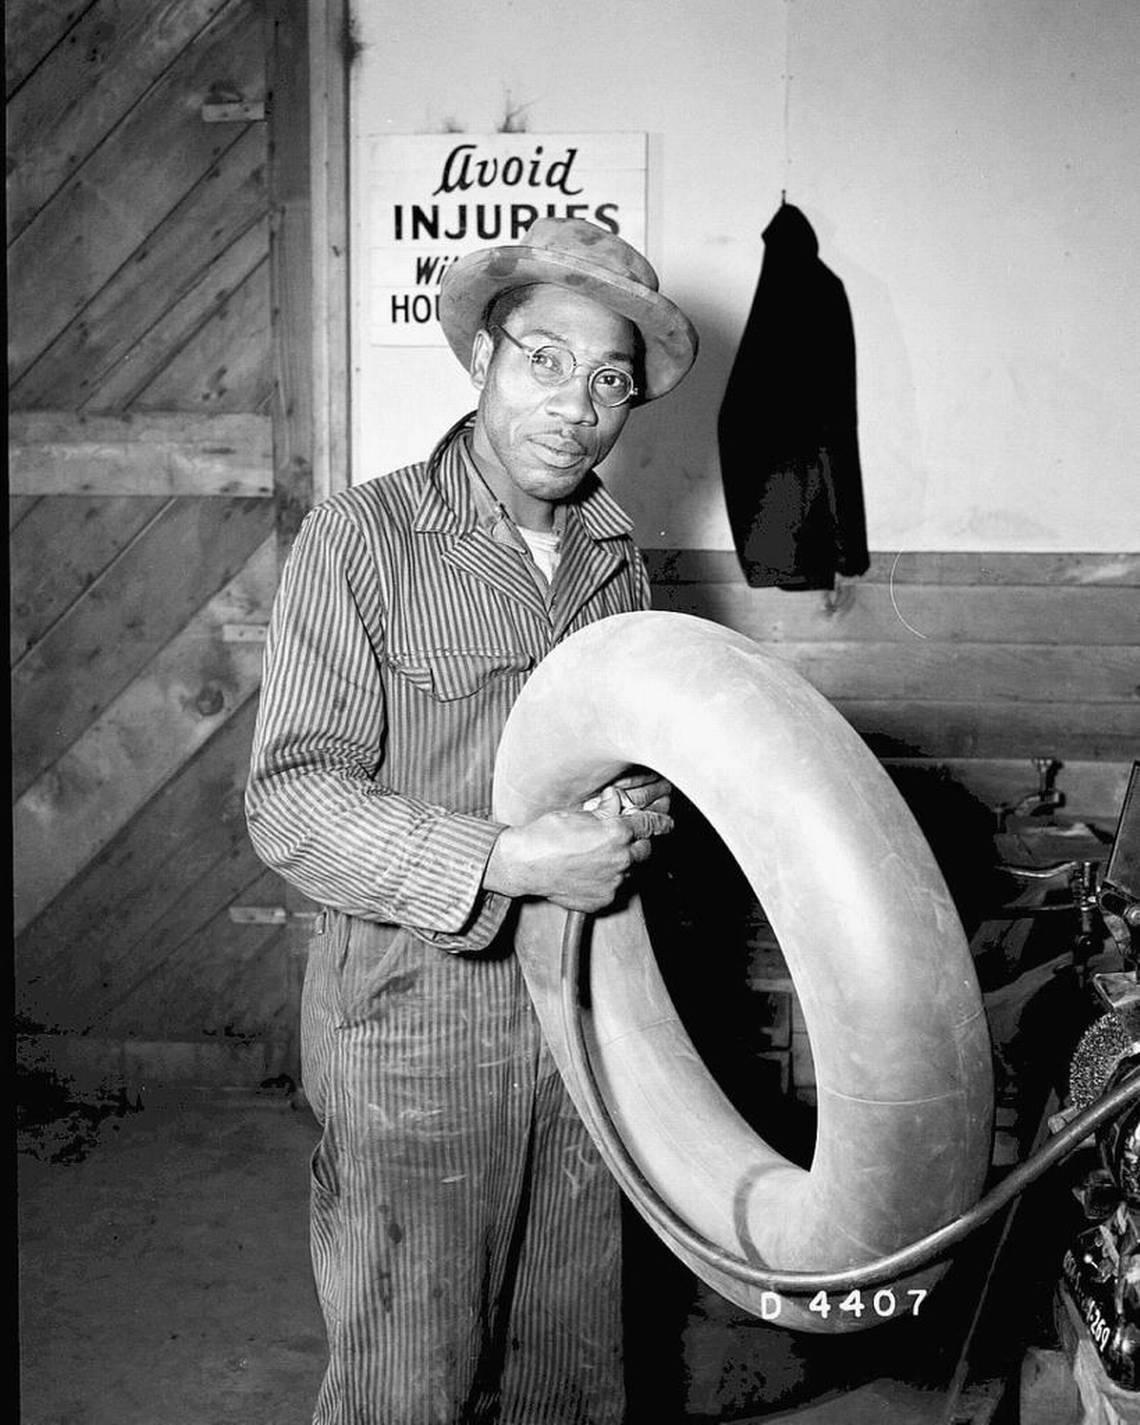 An employee repairs an inner tube for a tire at Hanford during World War II. Most black workers were assigned to unskilled labor, despite skills they brought to the project.